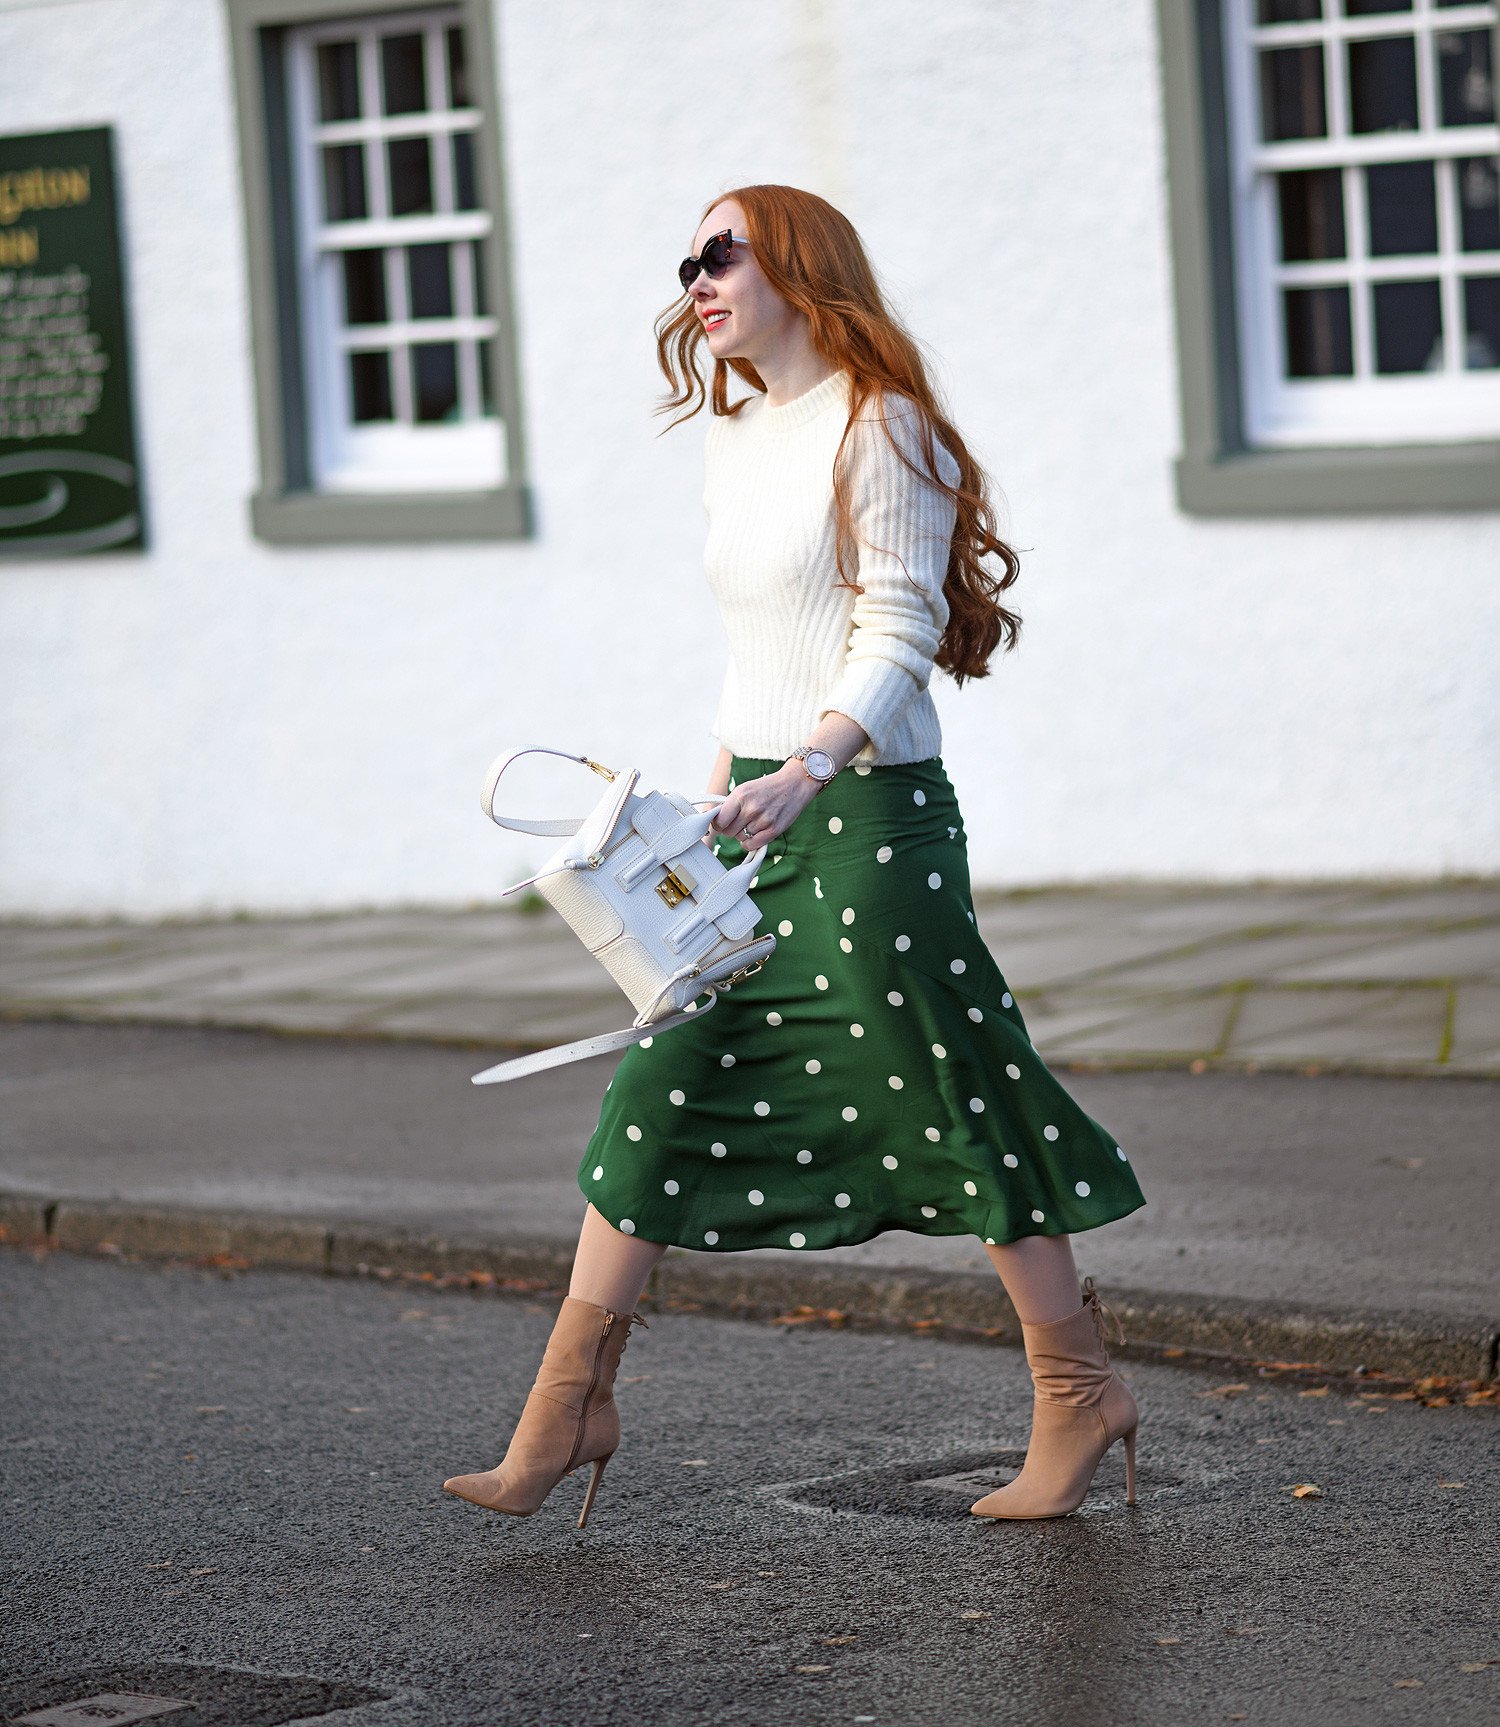 autumn outfit inspiration: grern polka dot skirt with white sweater